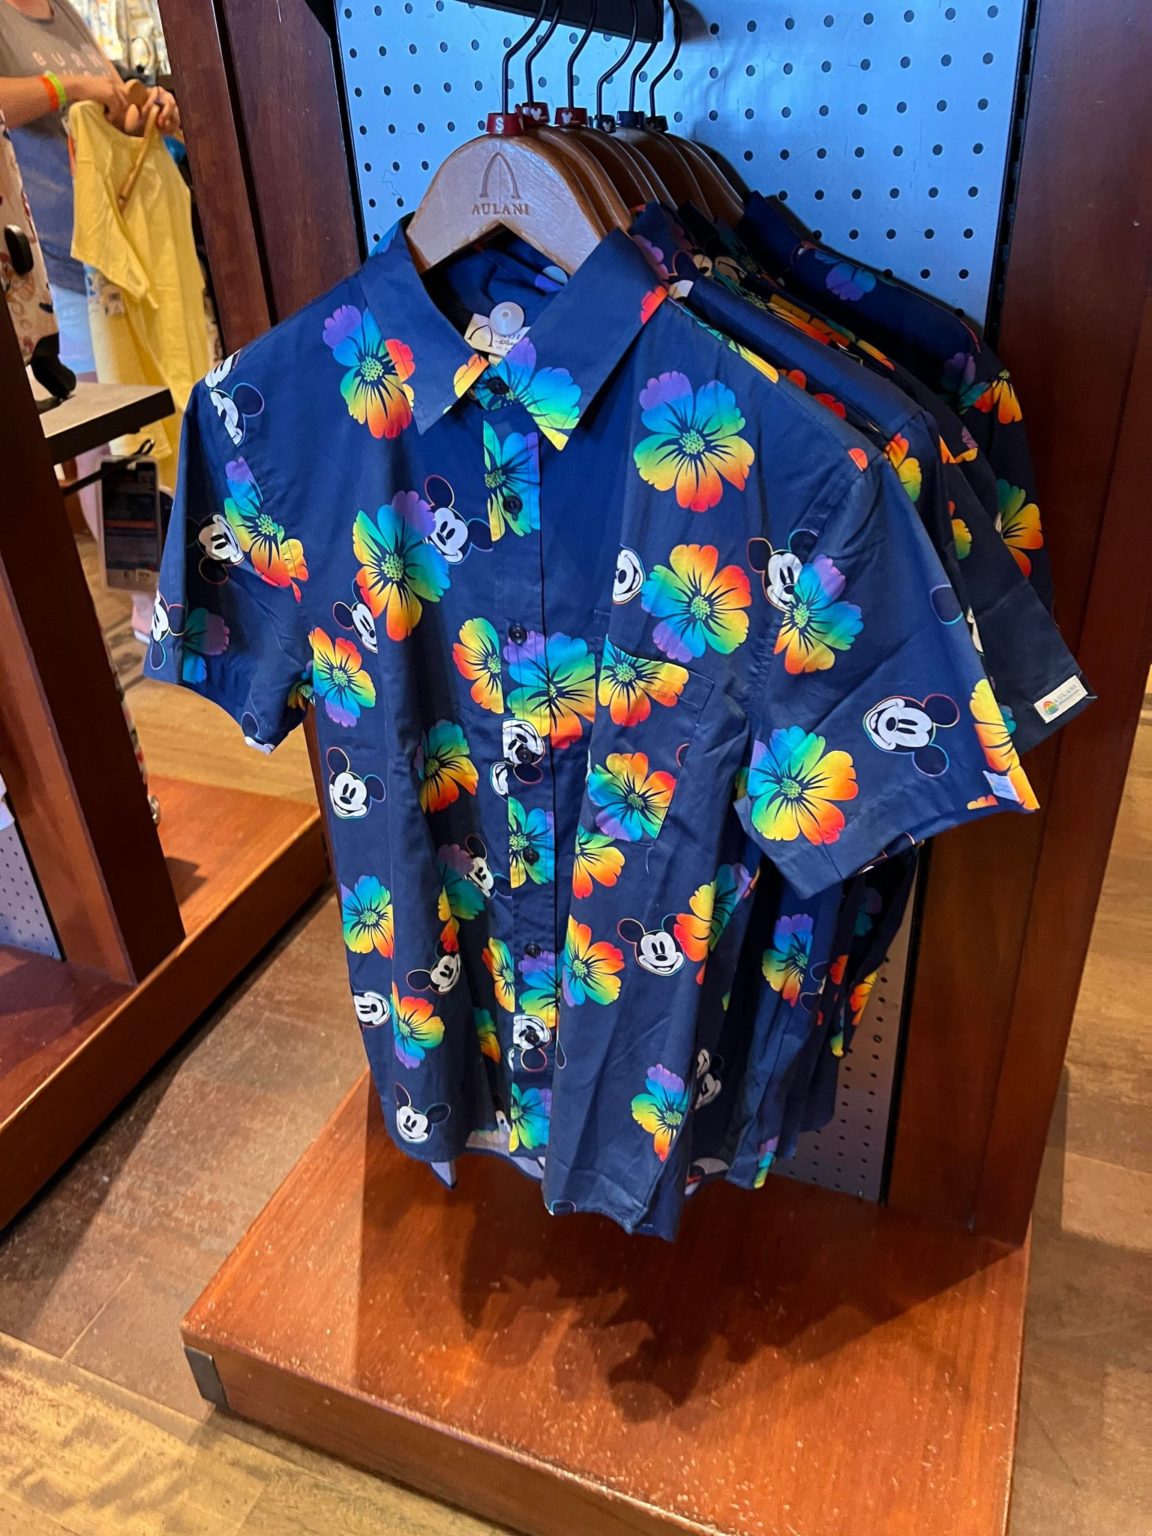 Colorful Pride Collection Arrives at Aulani - MickeyBlog.com